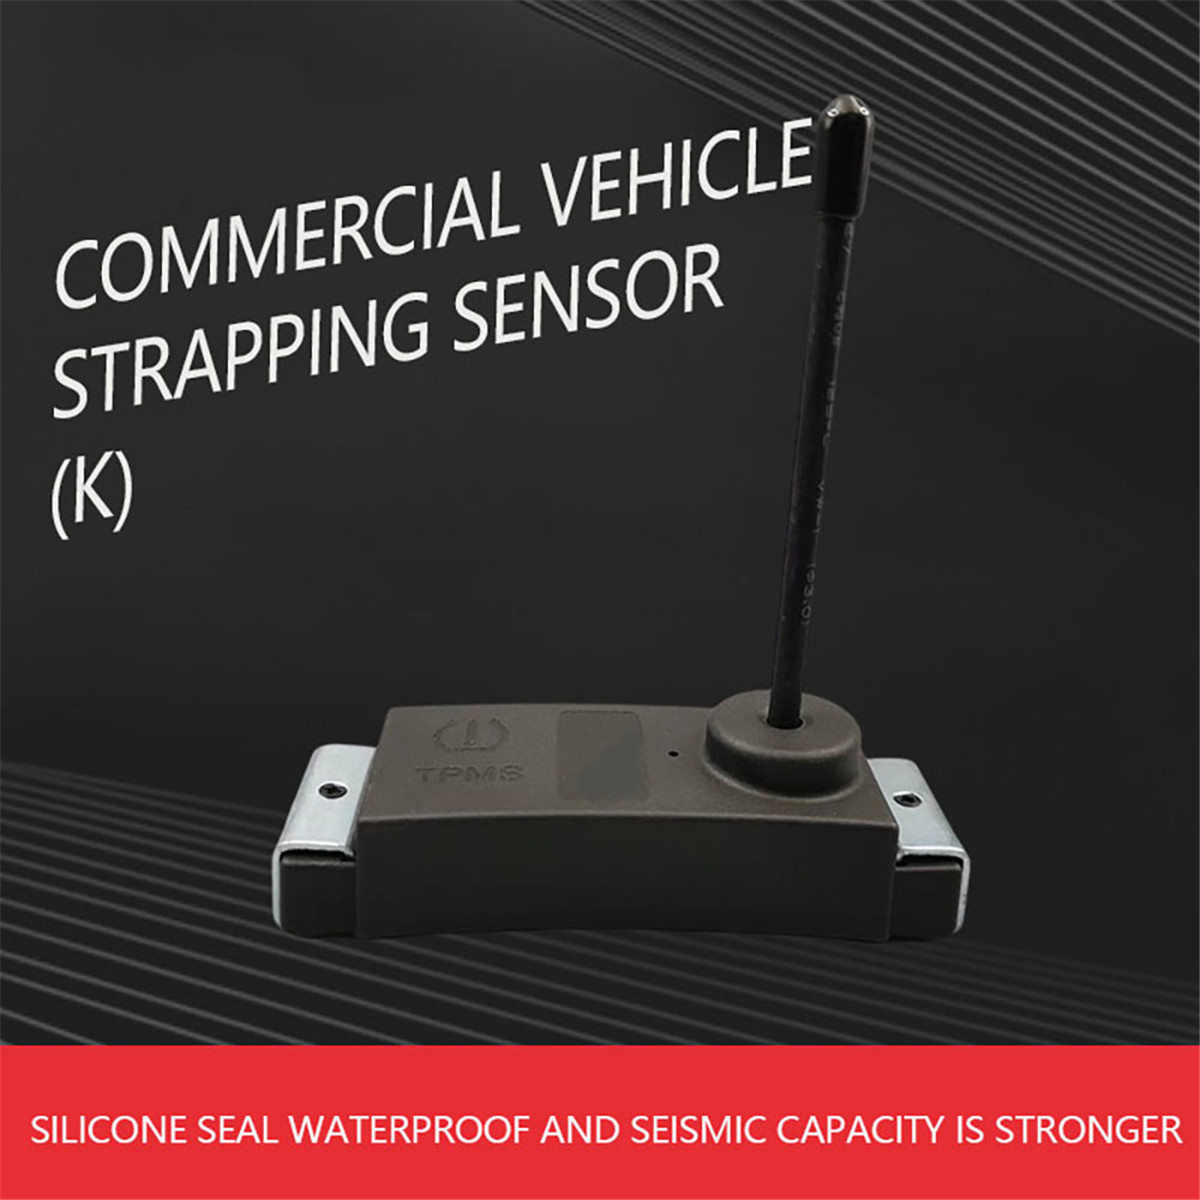 Commercial vehicle strapping sensor01 (10)